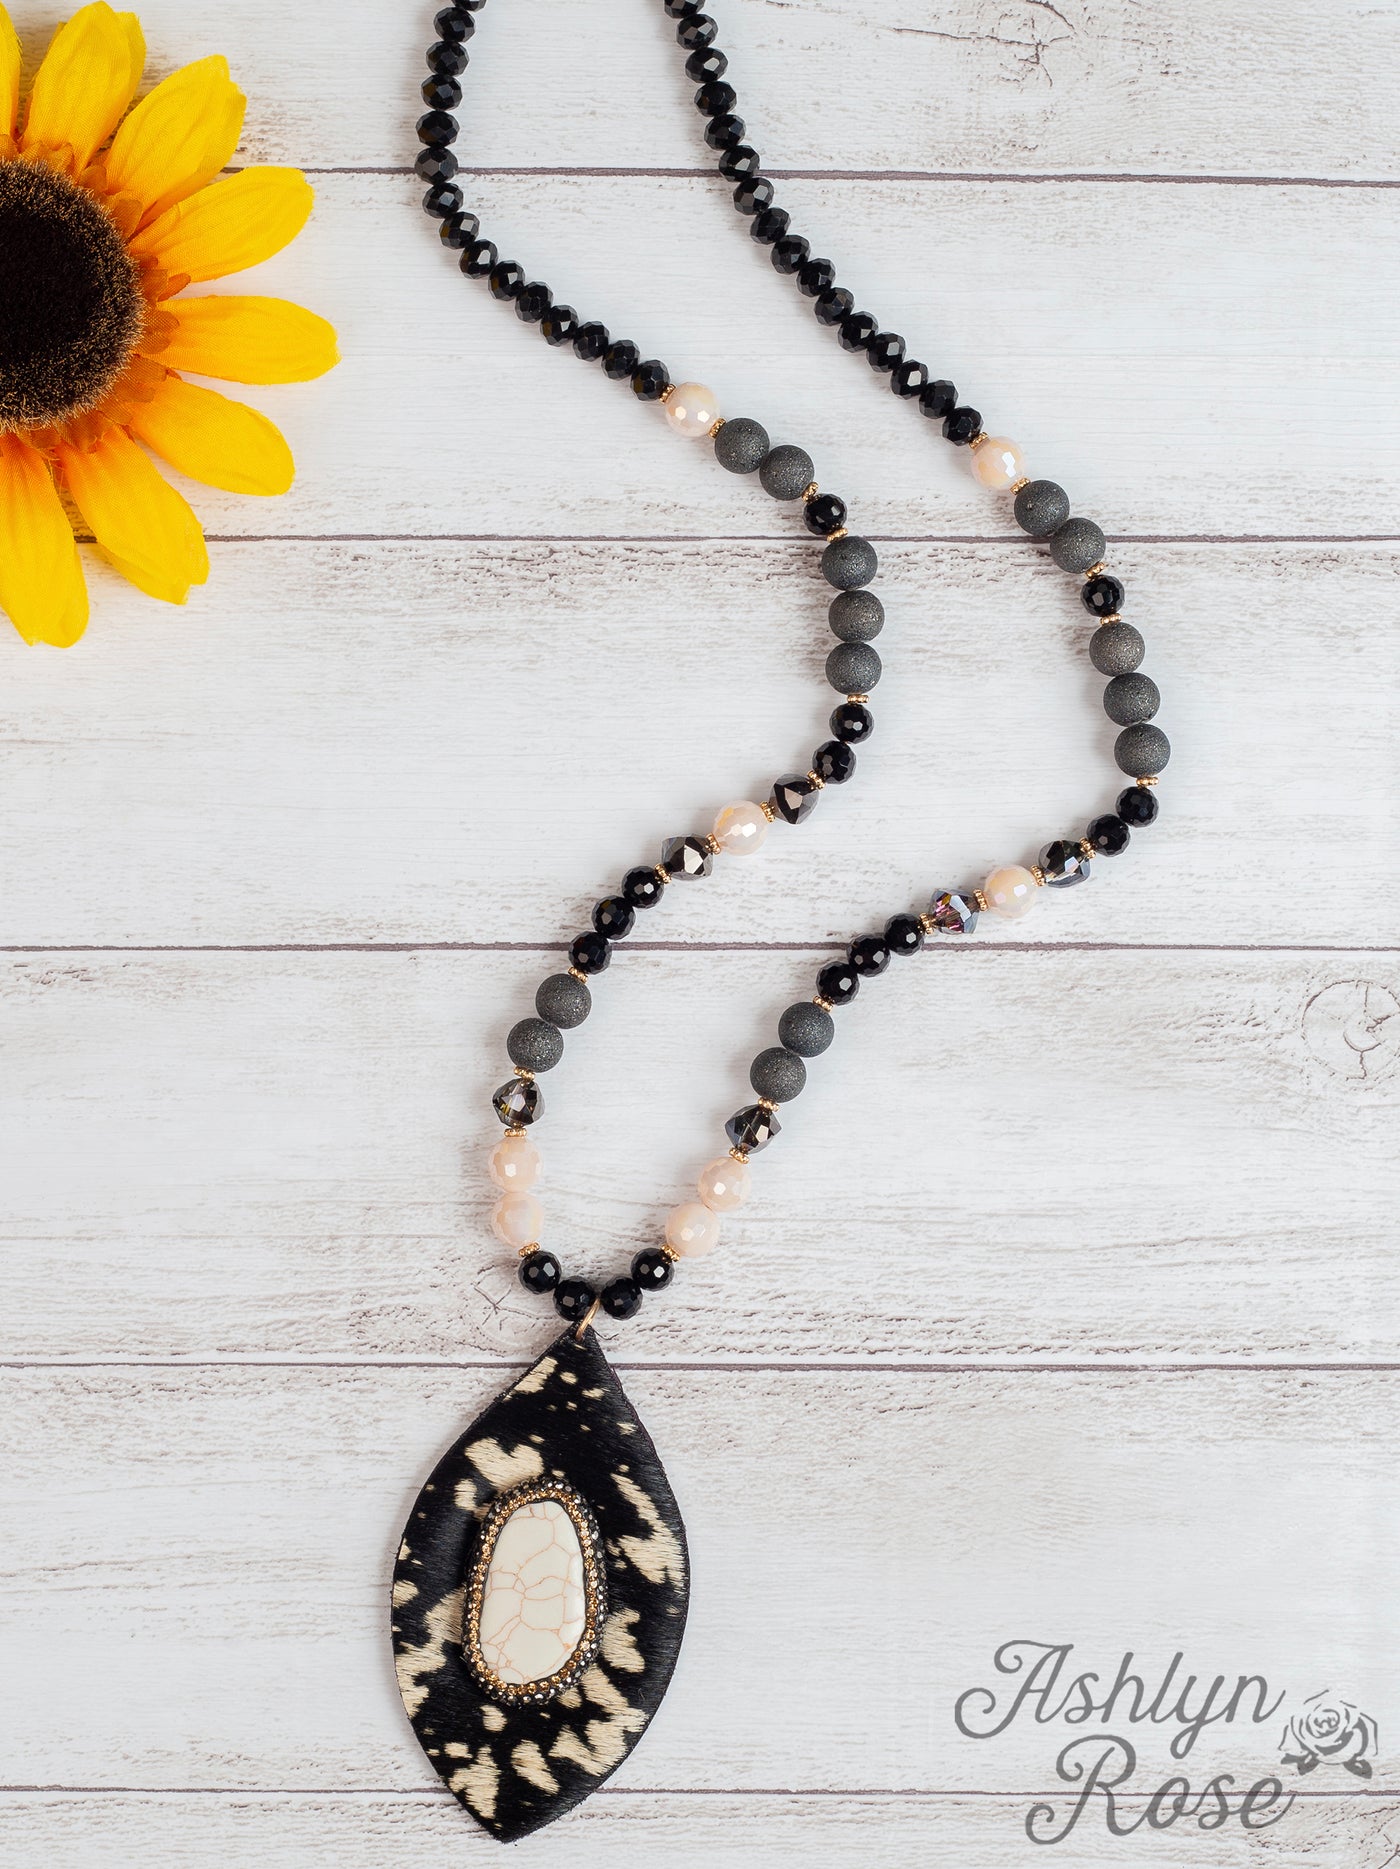 The Git Up Teardrop Beaded Necklace with Center Bedazzled Stone, Black Cow Hide